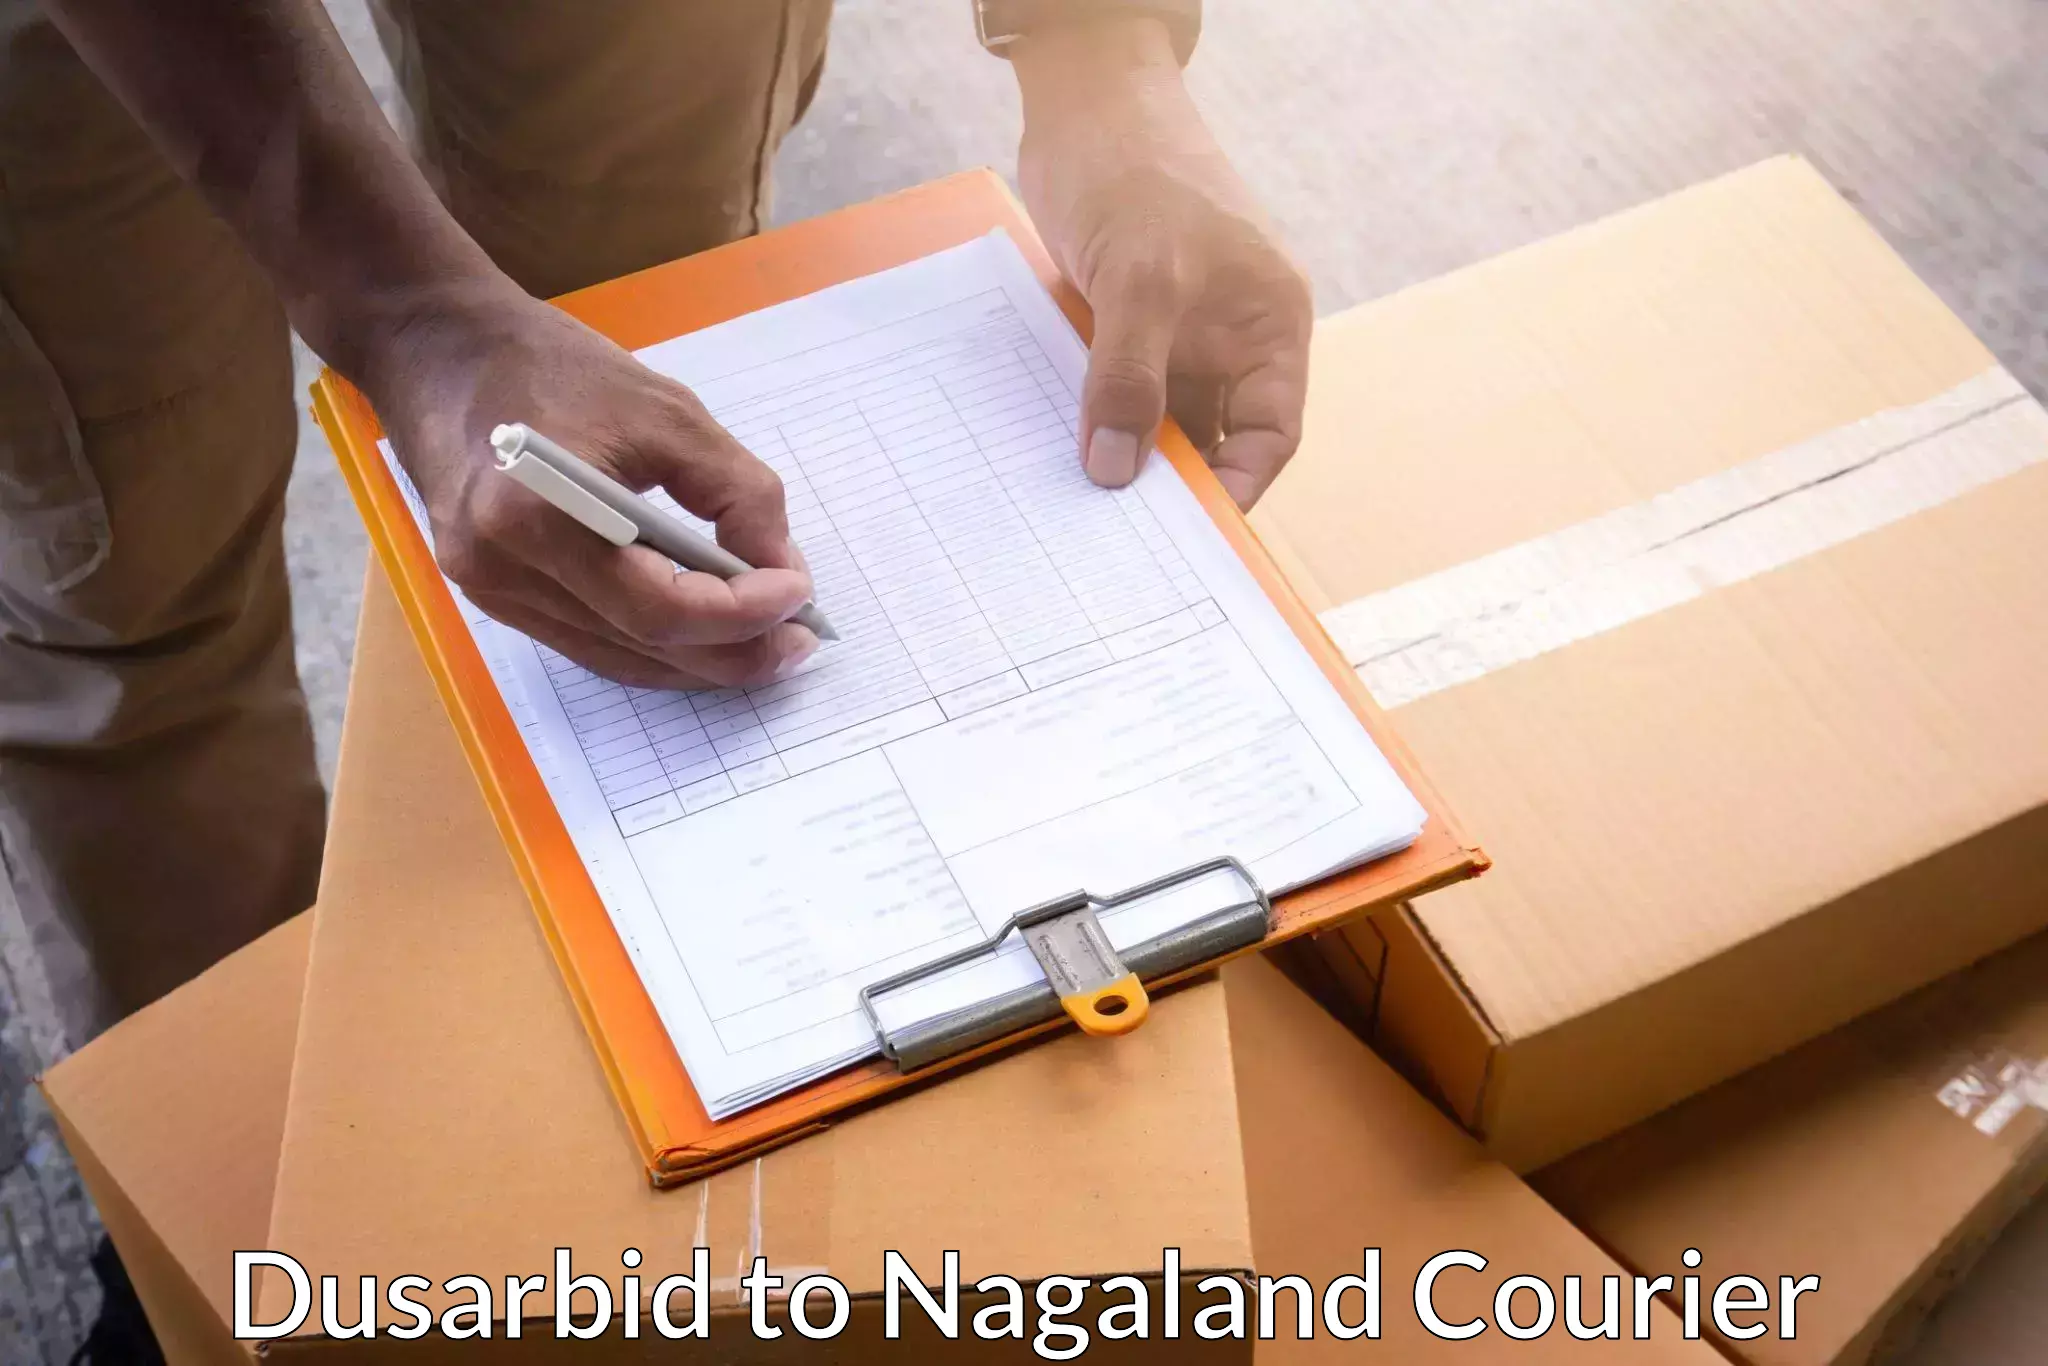 Easy return solutions Dusarbid to Nagaland